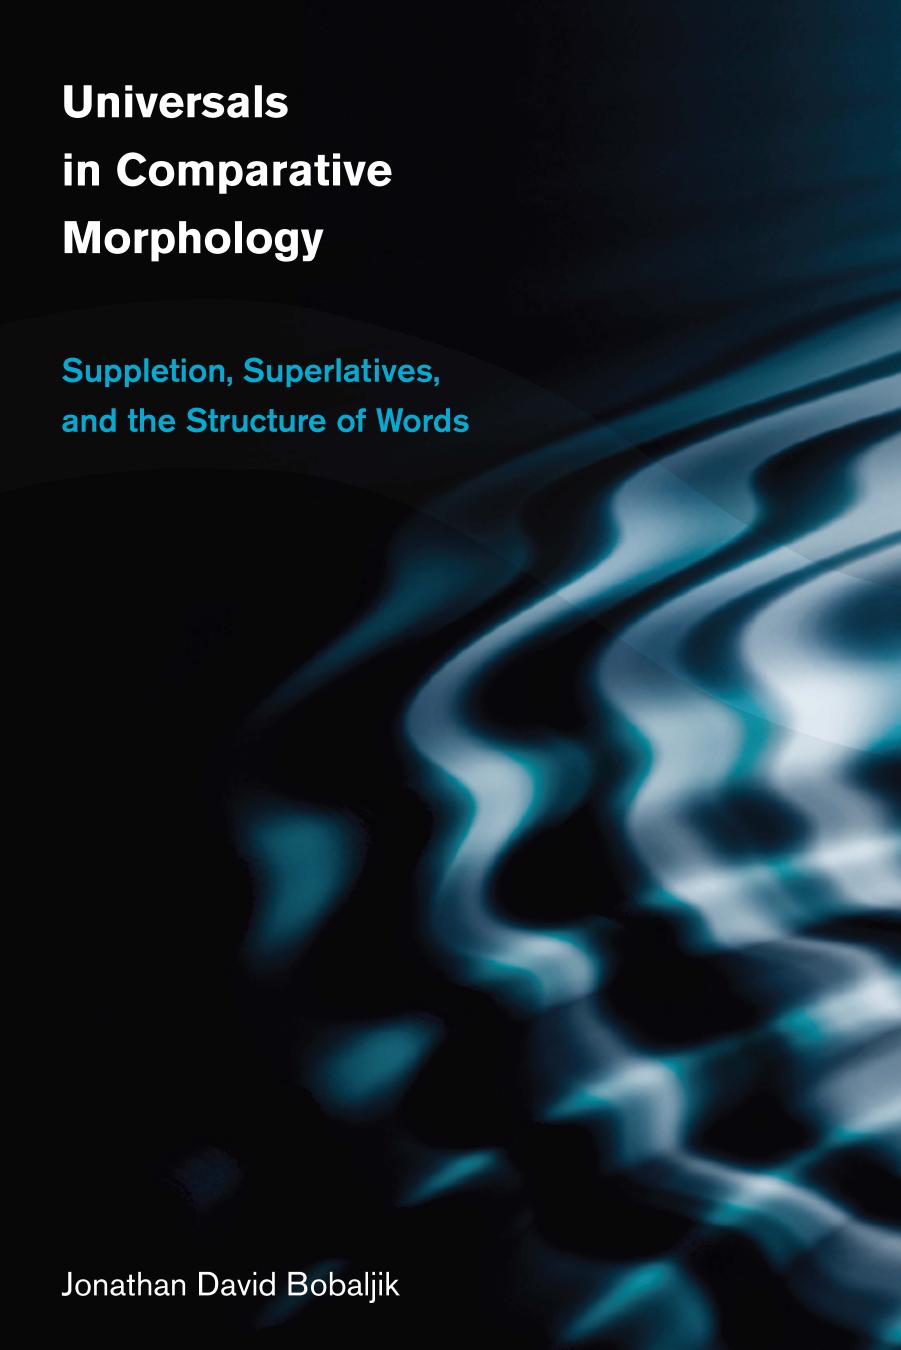 Universals in Comparative Morphology: Suppletion, Superlatives, and the Structure of Words